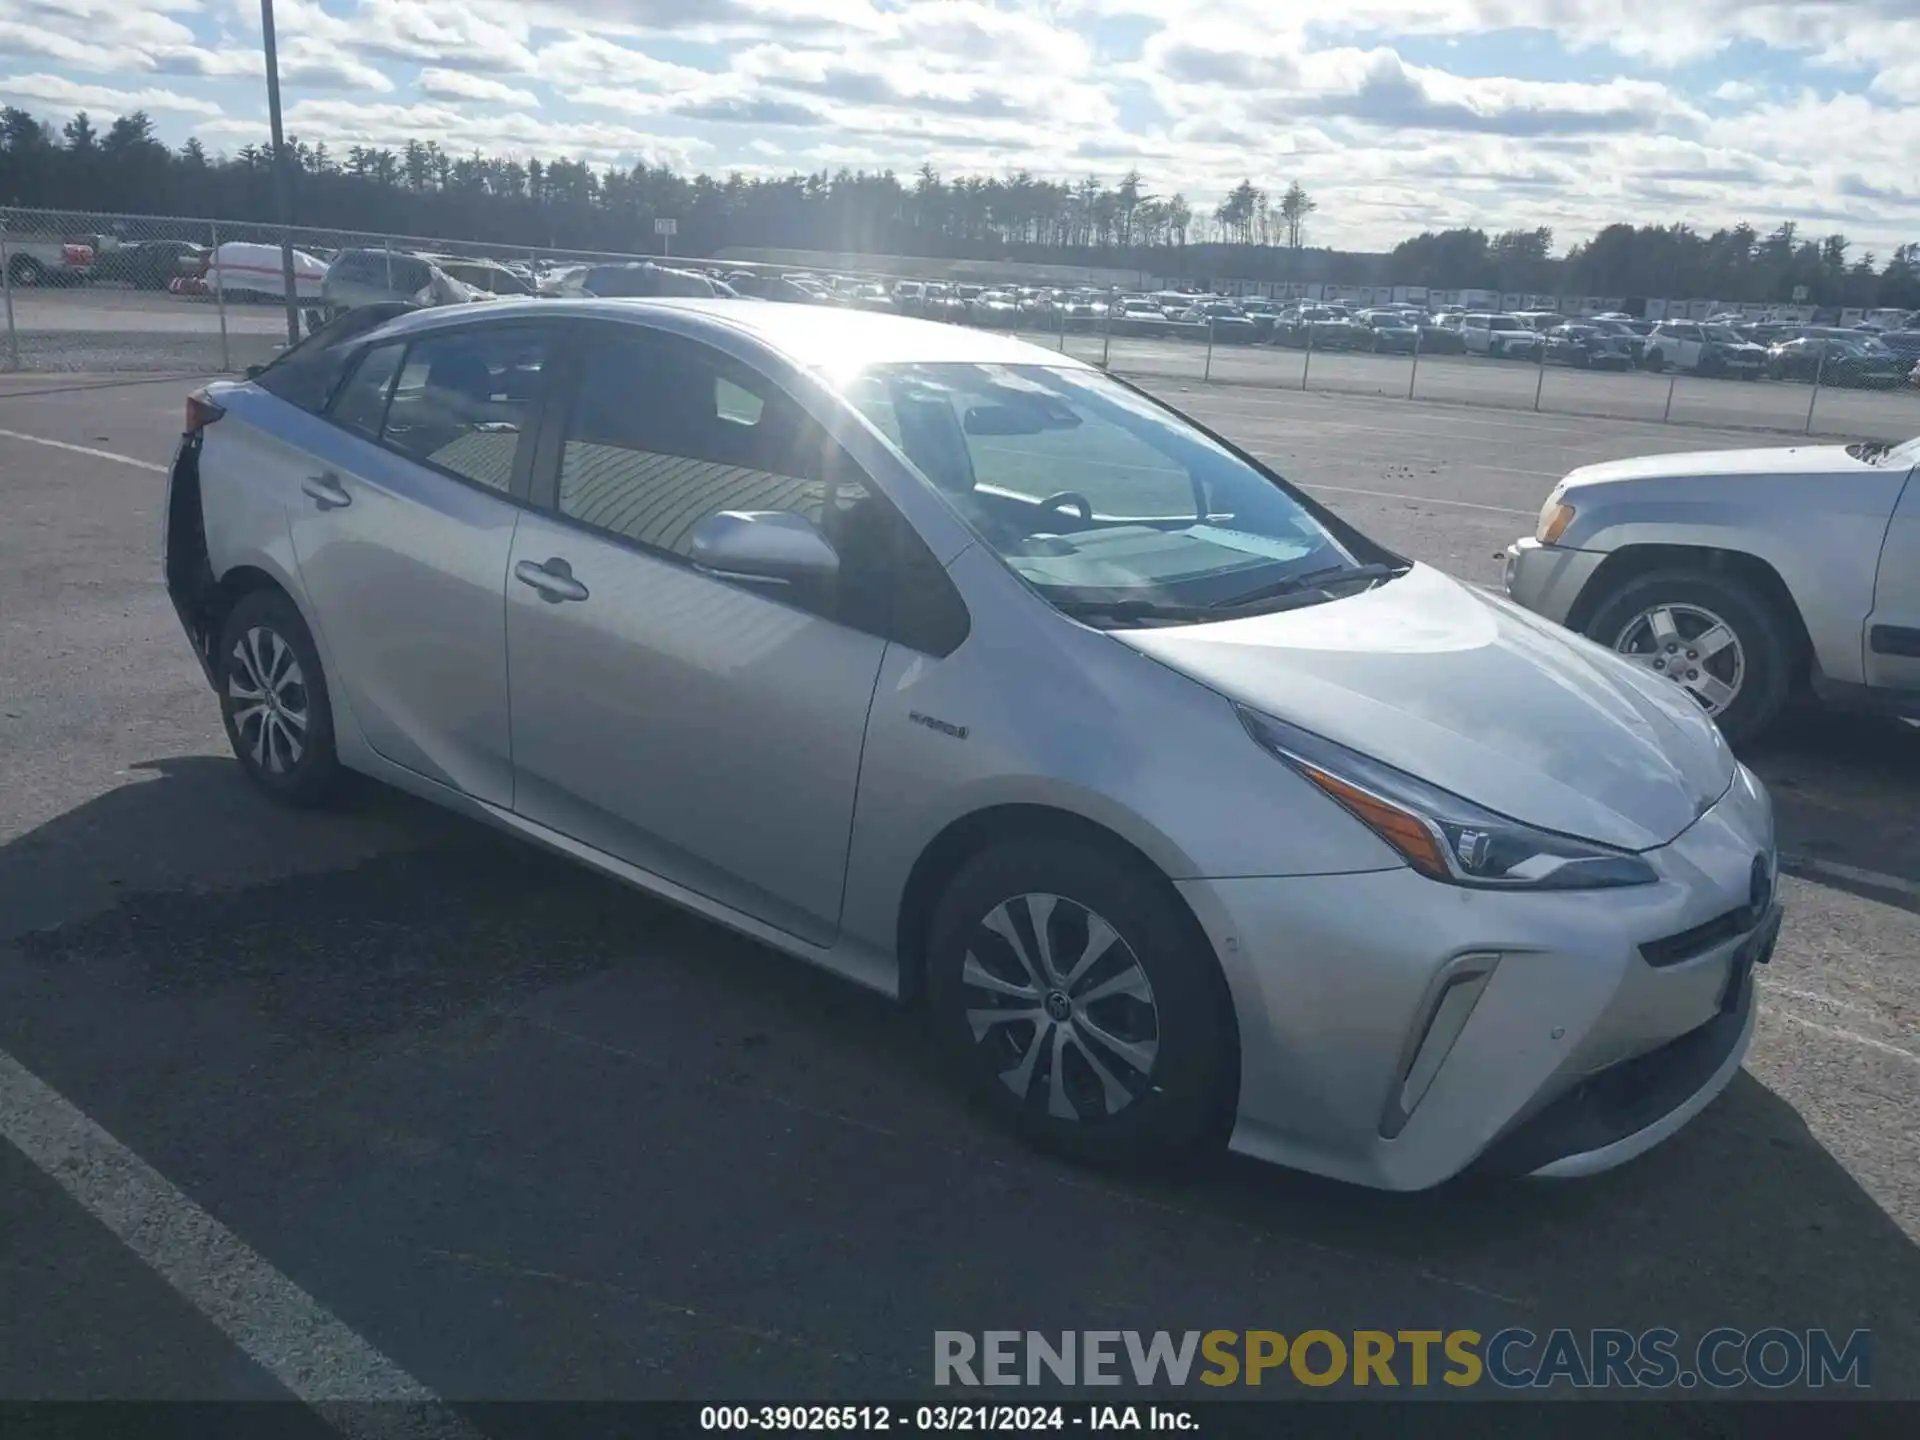 1 Photograph of a damaged car JTDL9MFUXN3037020 TOYOTA PRIUS 2022